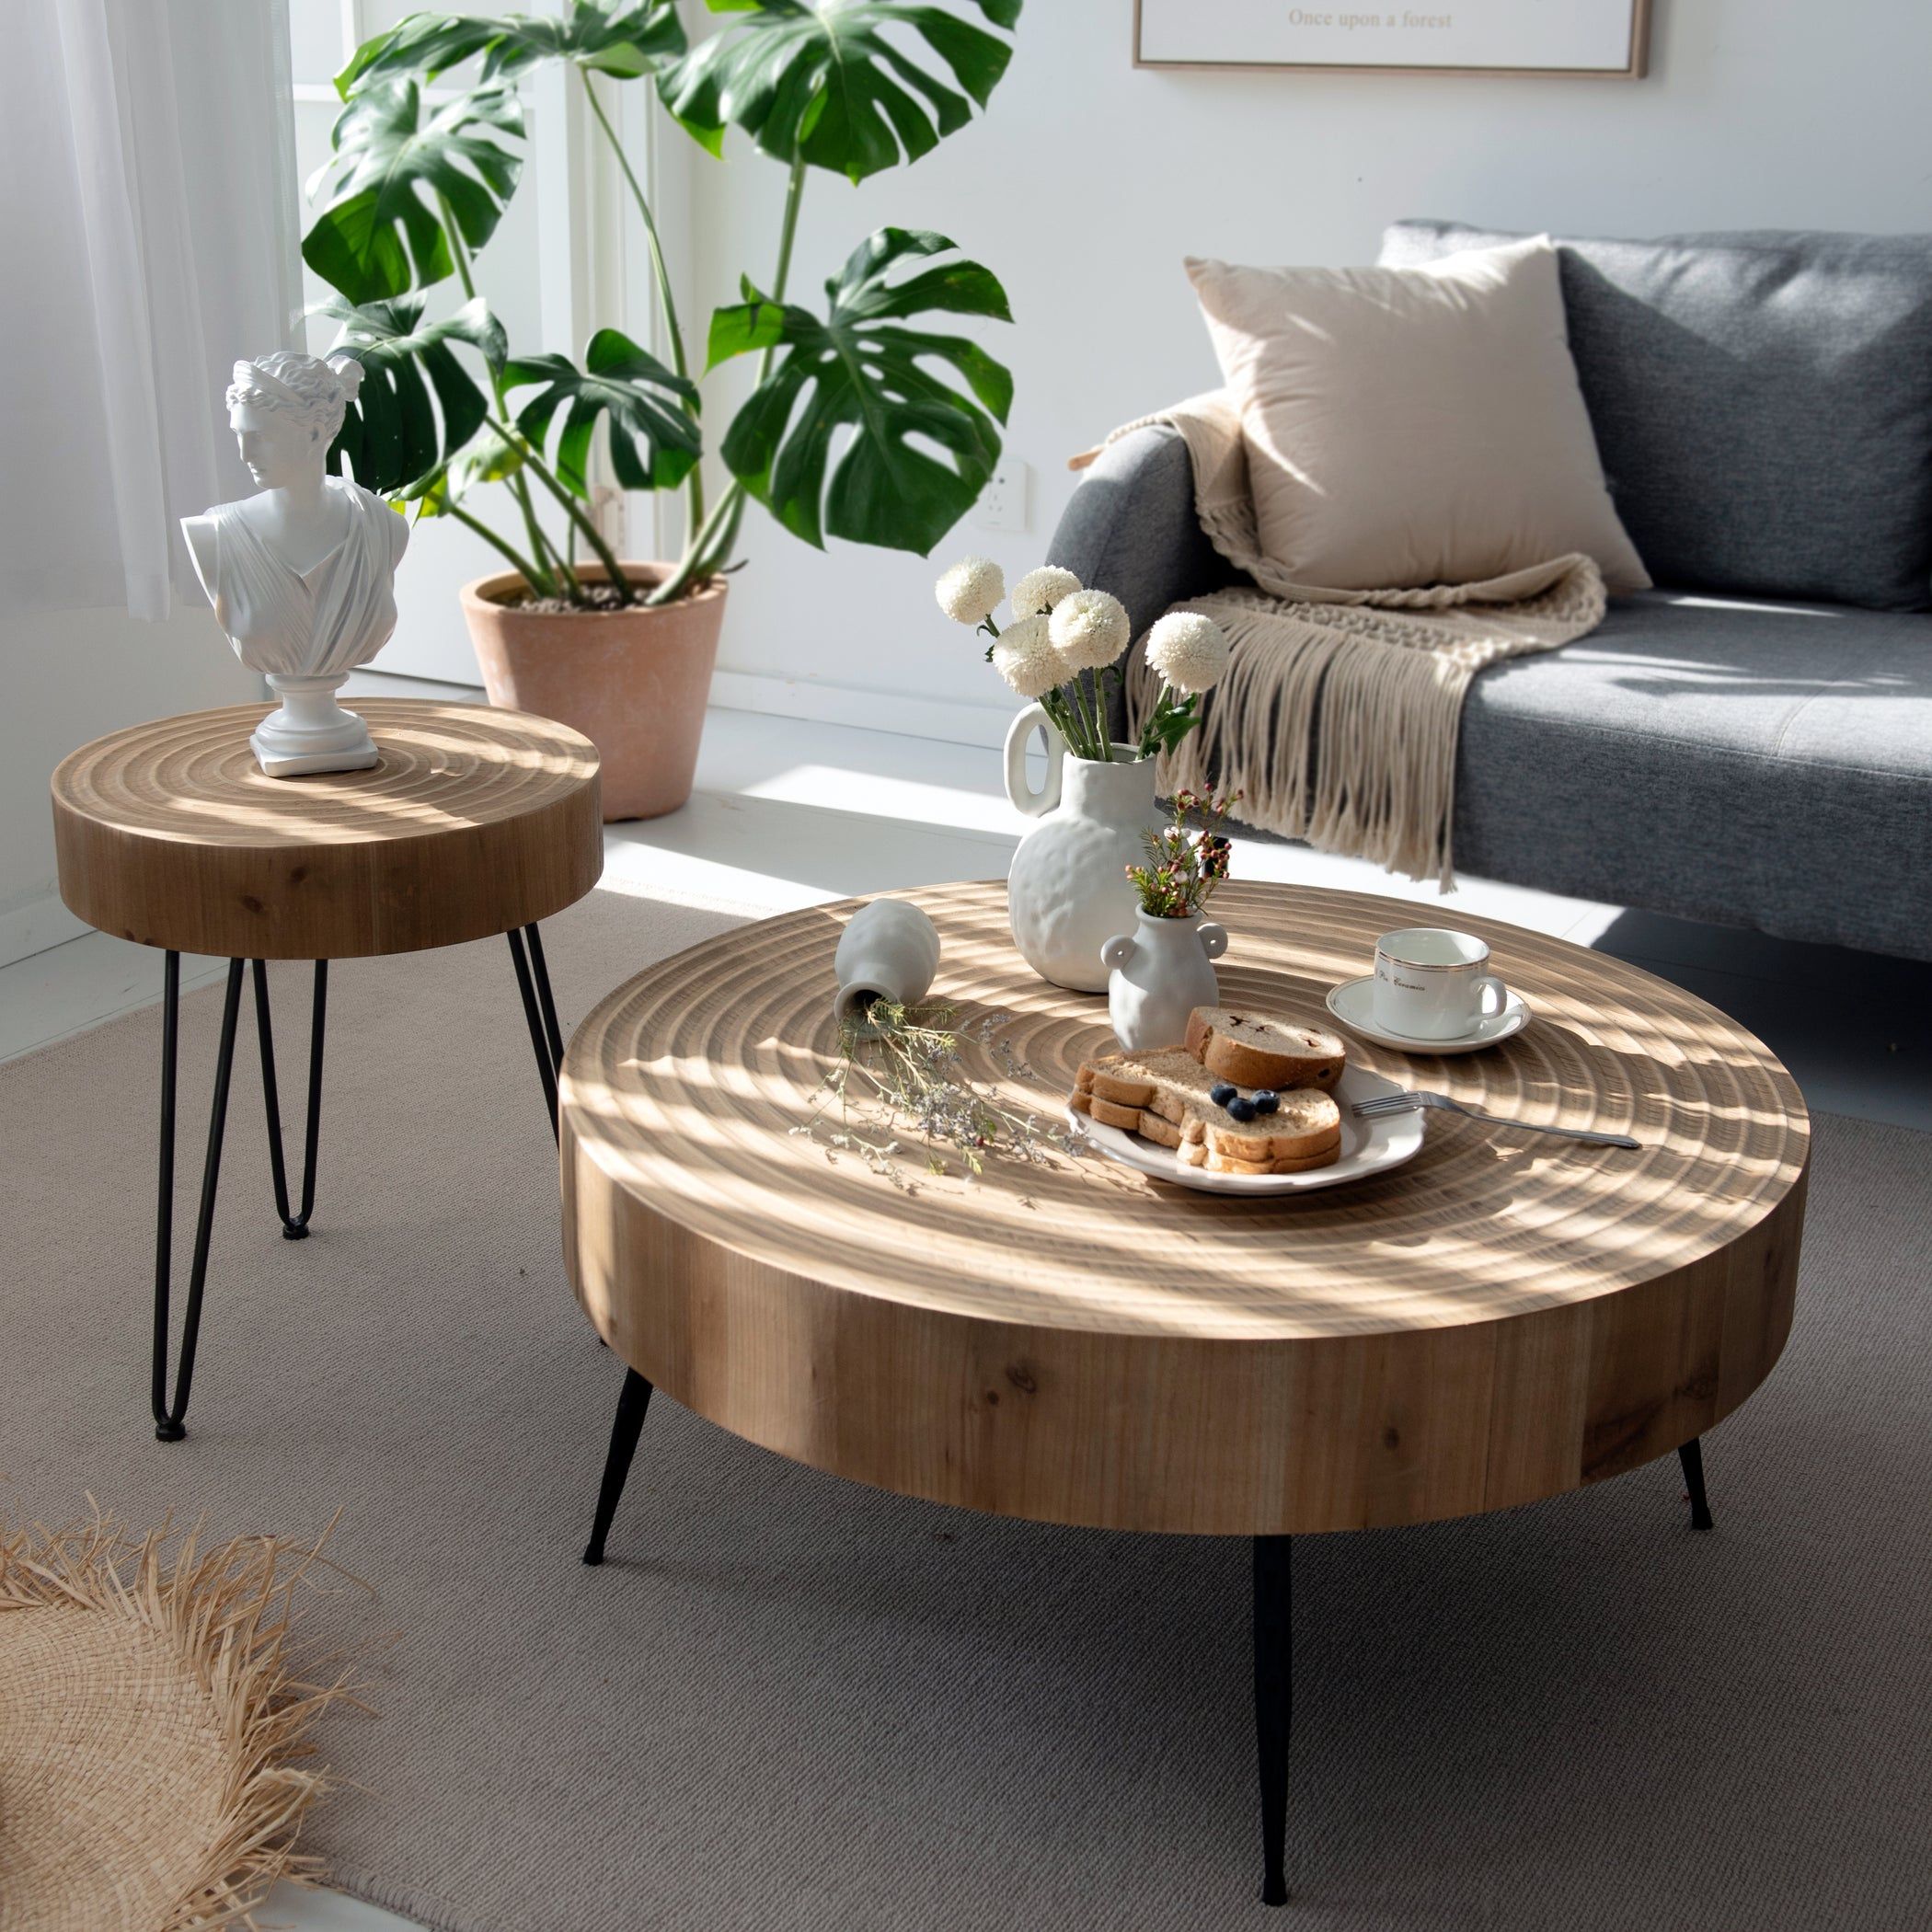 Cozayh 2 Piece Modern Farmhouse Living Room Coffee Table Set, Round Inside Modern Farmhouse Coffee Table Sets (View 5 of 20)